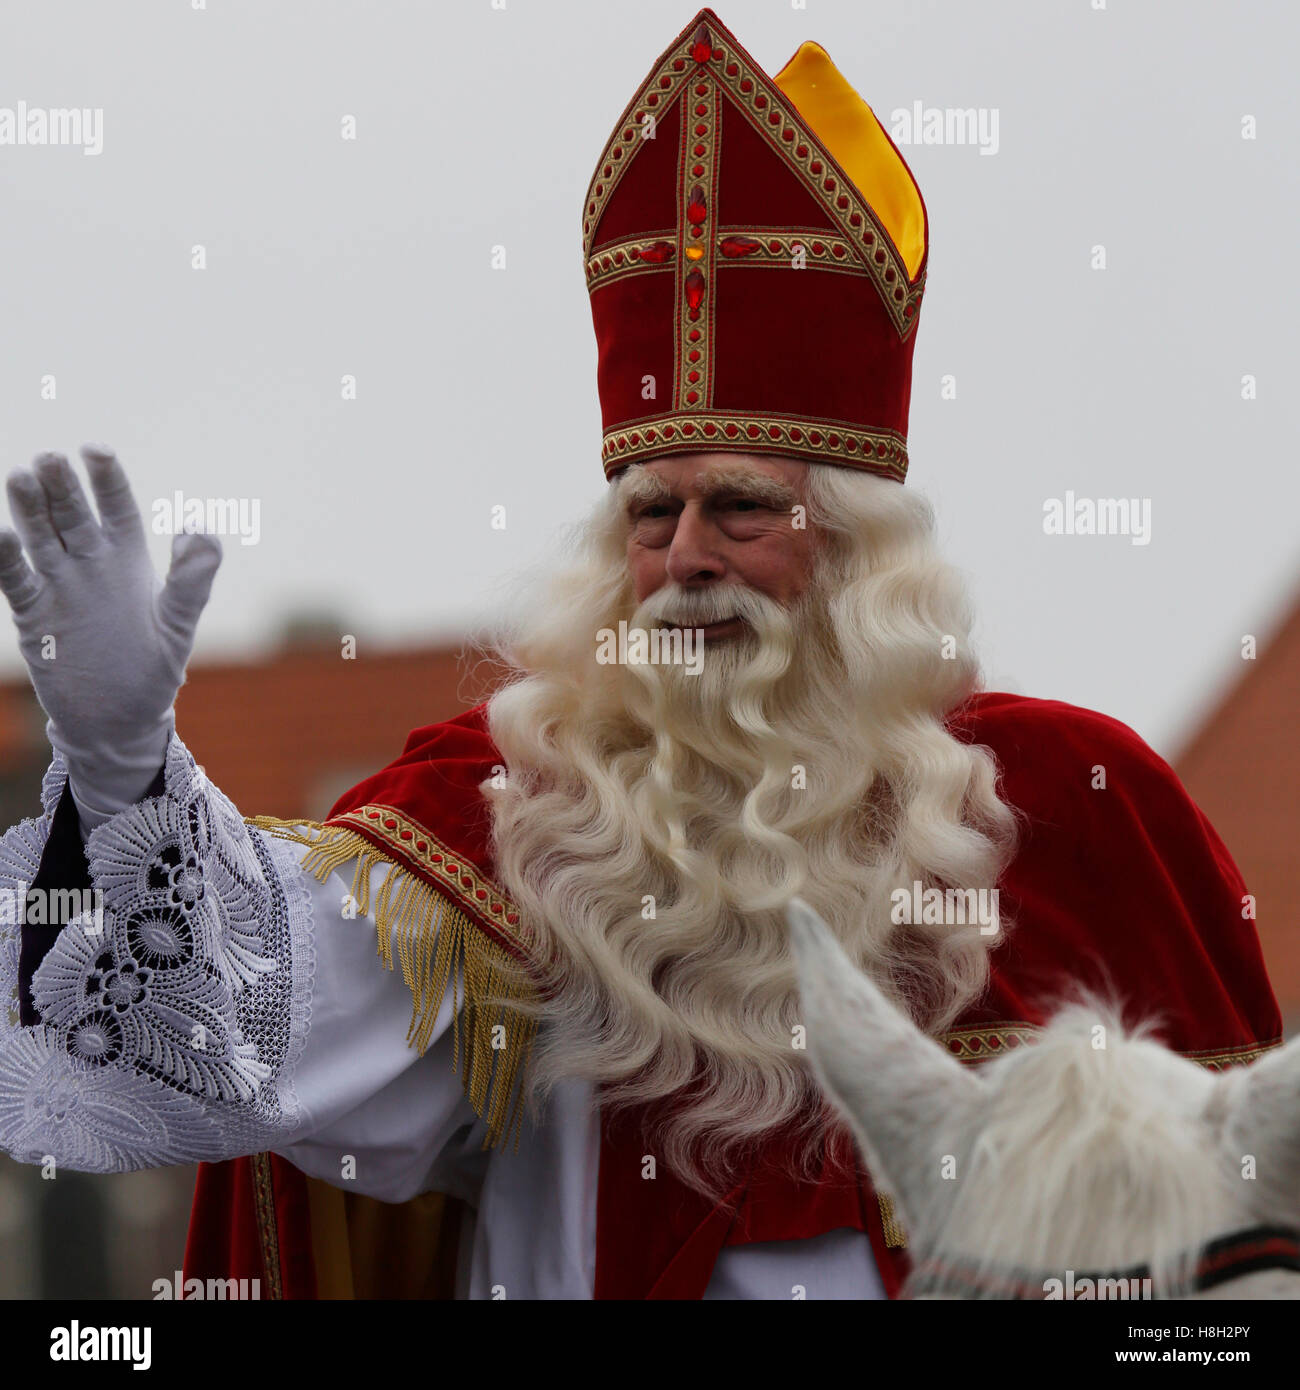 2 Sinterklaas Boat High Resolution Stock Photography and Images - Alamy